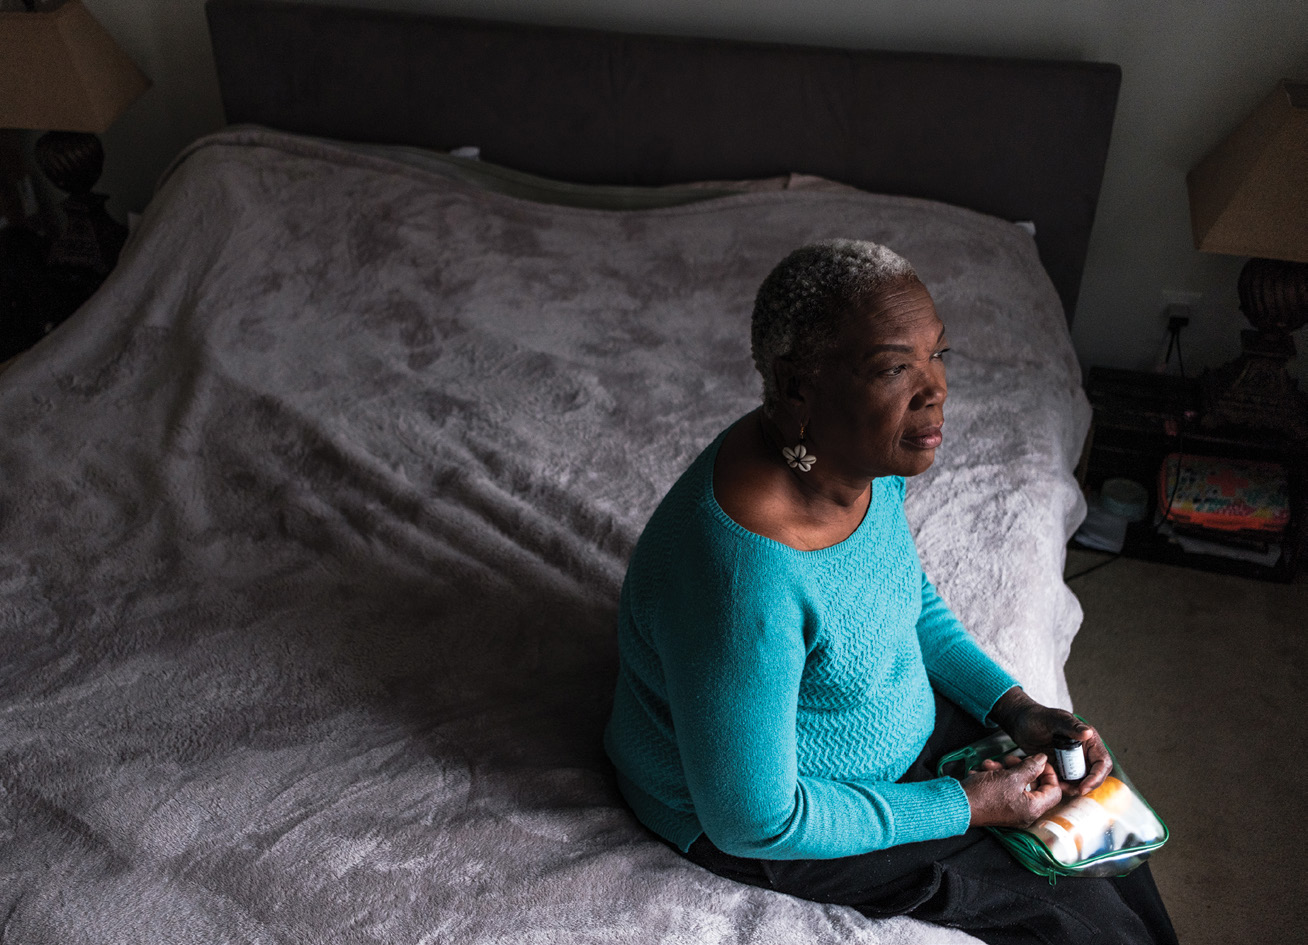 an older woman with graying hair sits on her bed, holding a bottle of prescription pills and a bag of other medicines